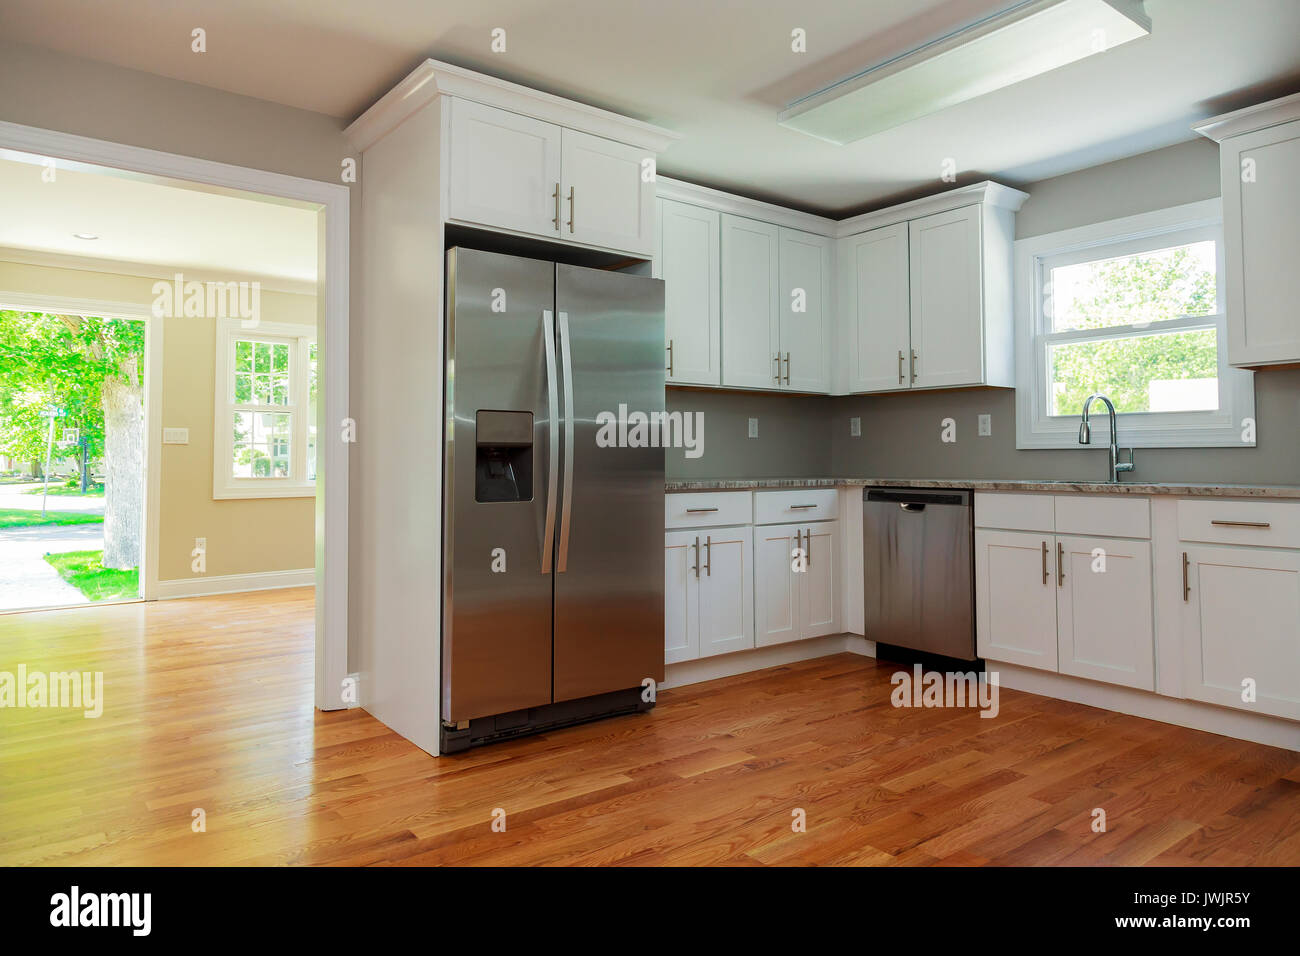 White kitchen interior with sink, cabinets, and hardwood floors in new luxury home with lights off Stock Photo